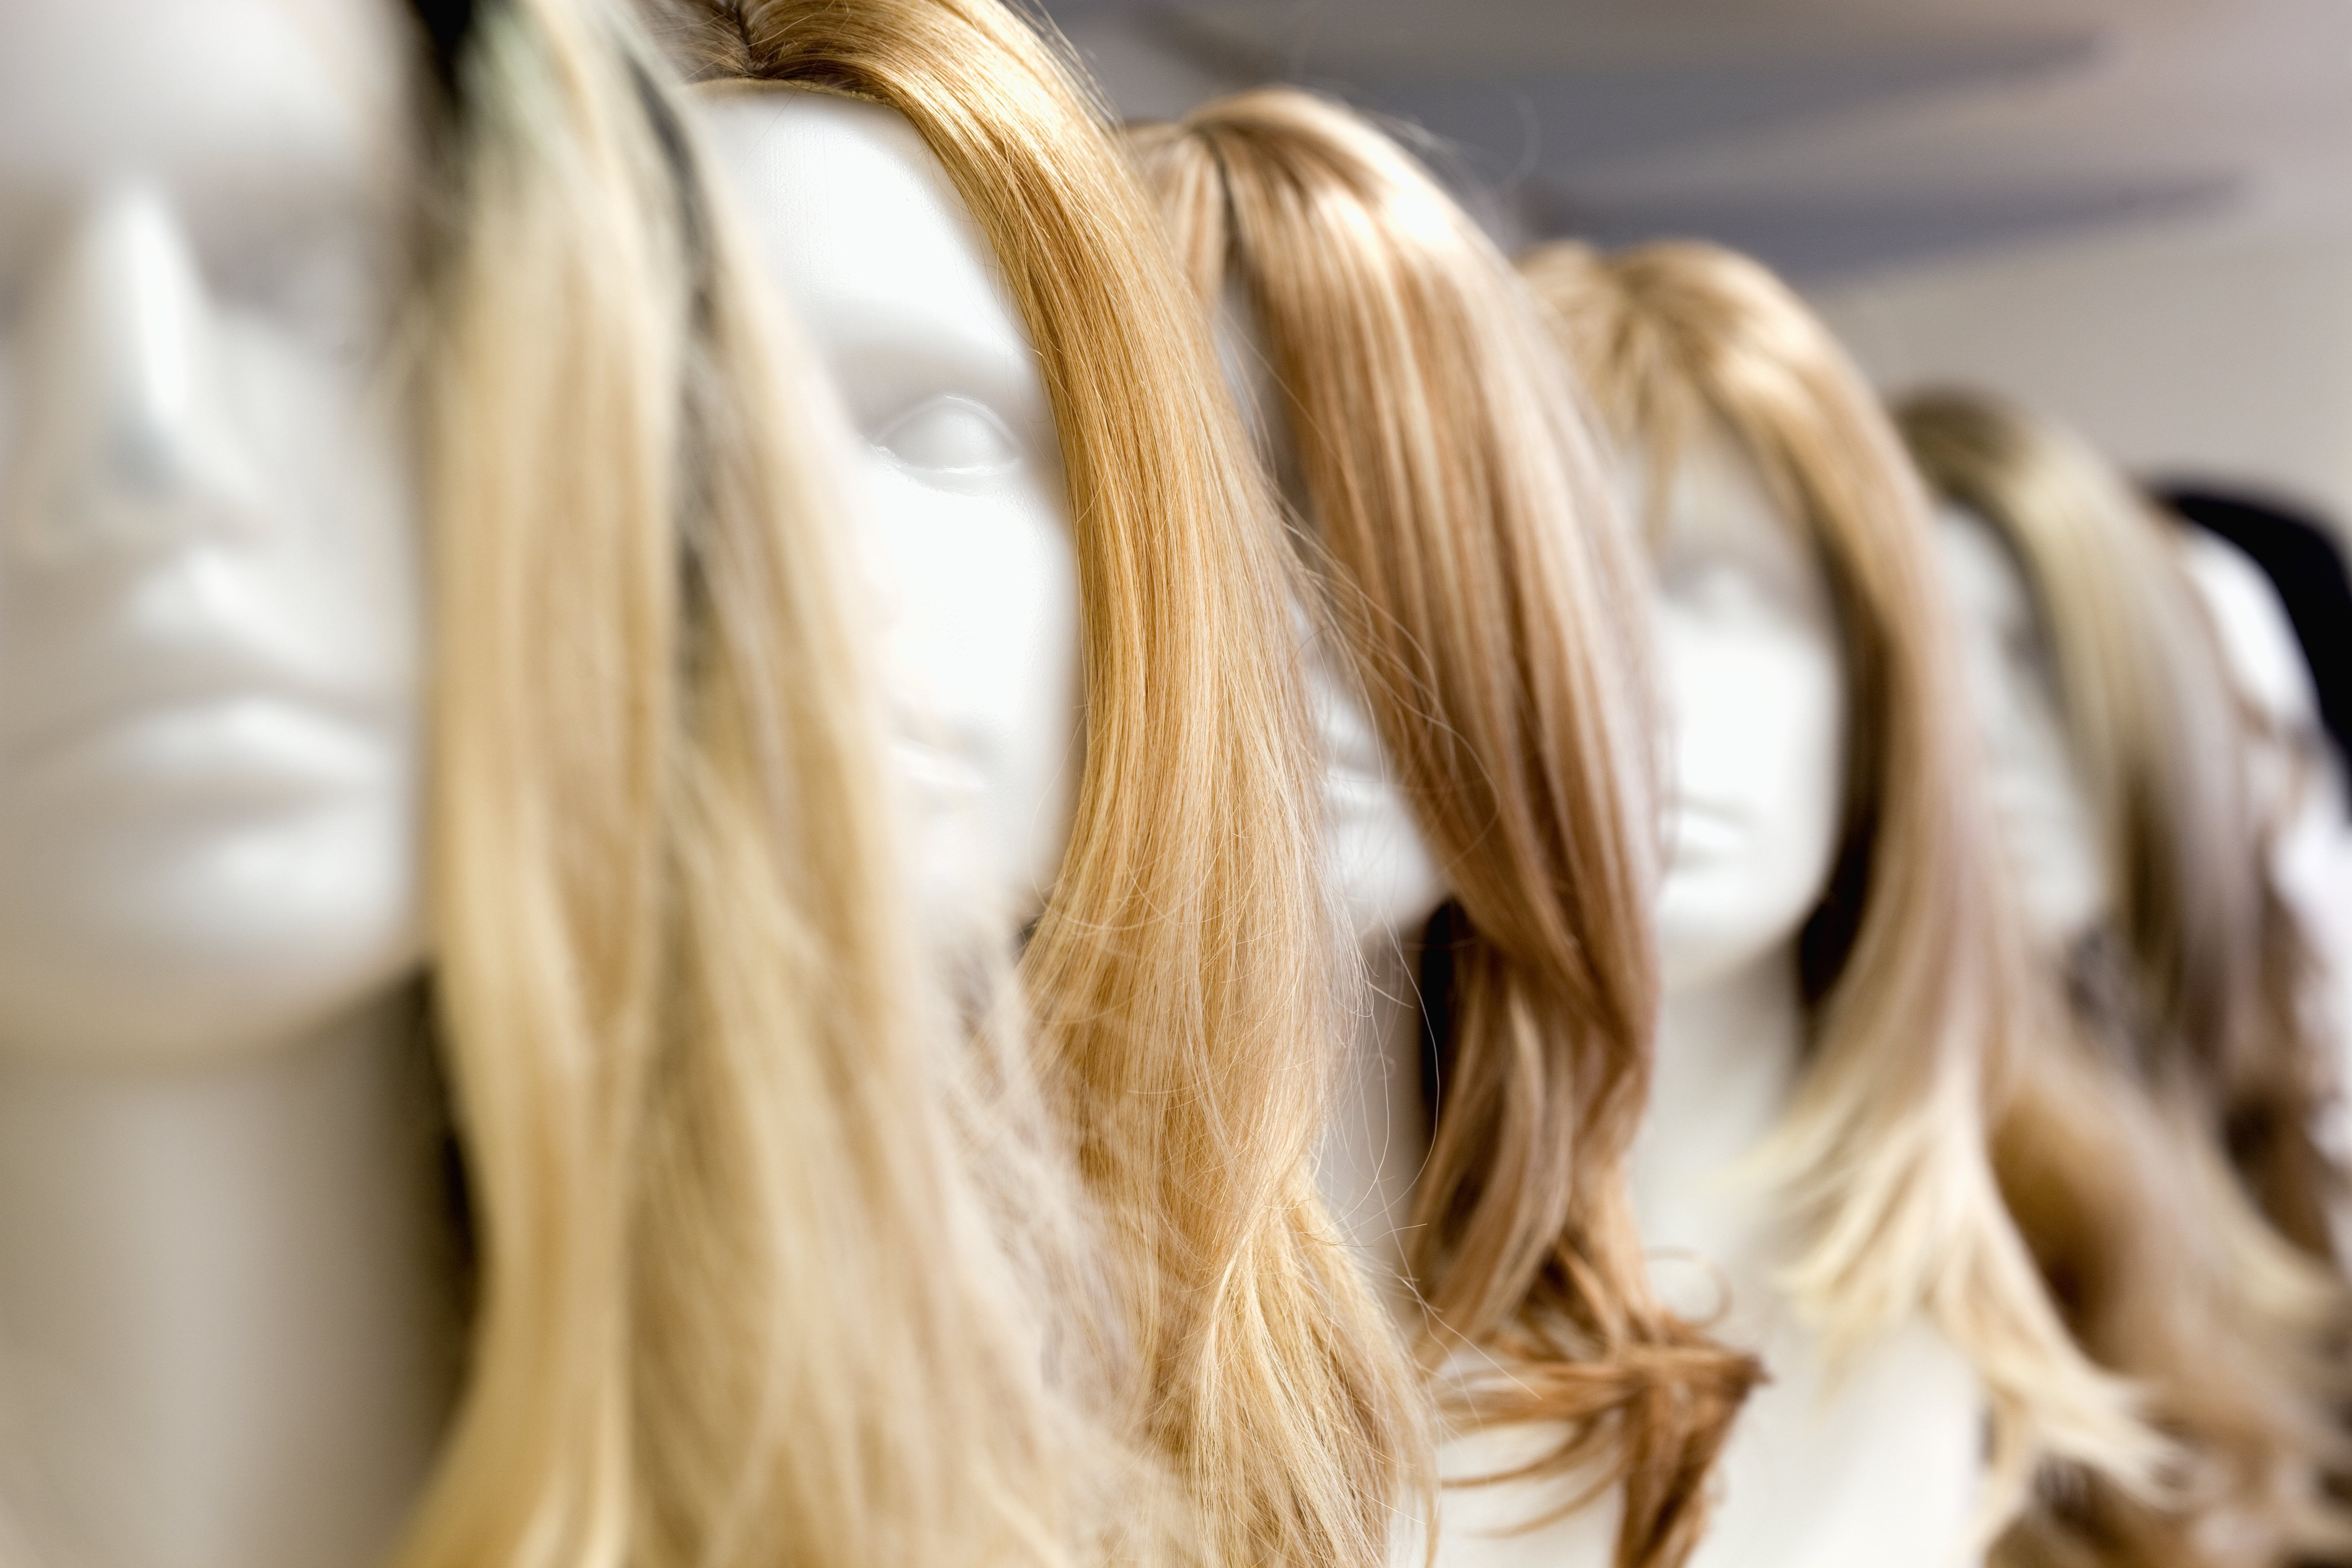 Row,Of,Mannequin,Heads,With,Wigs,On,The,Shelf